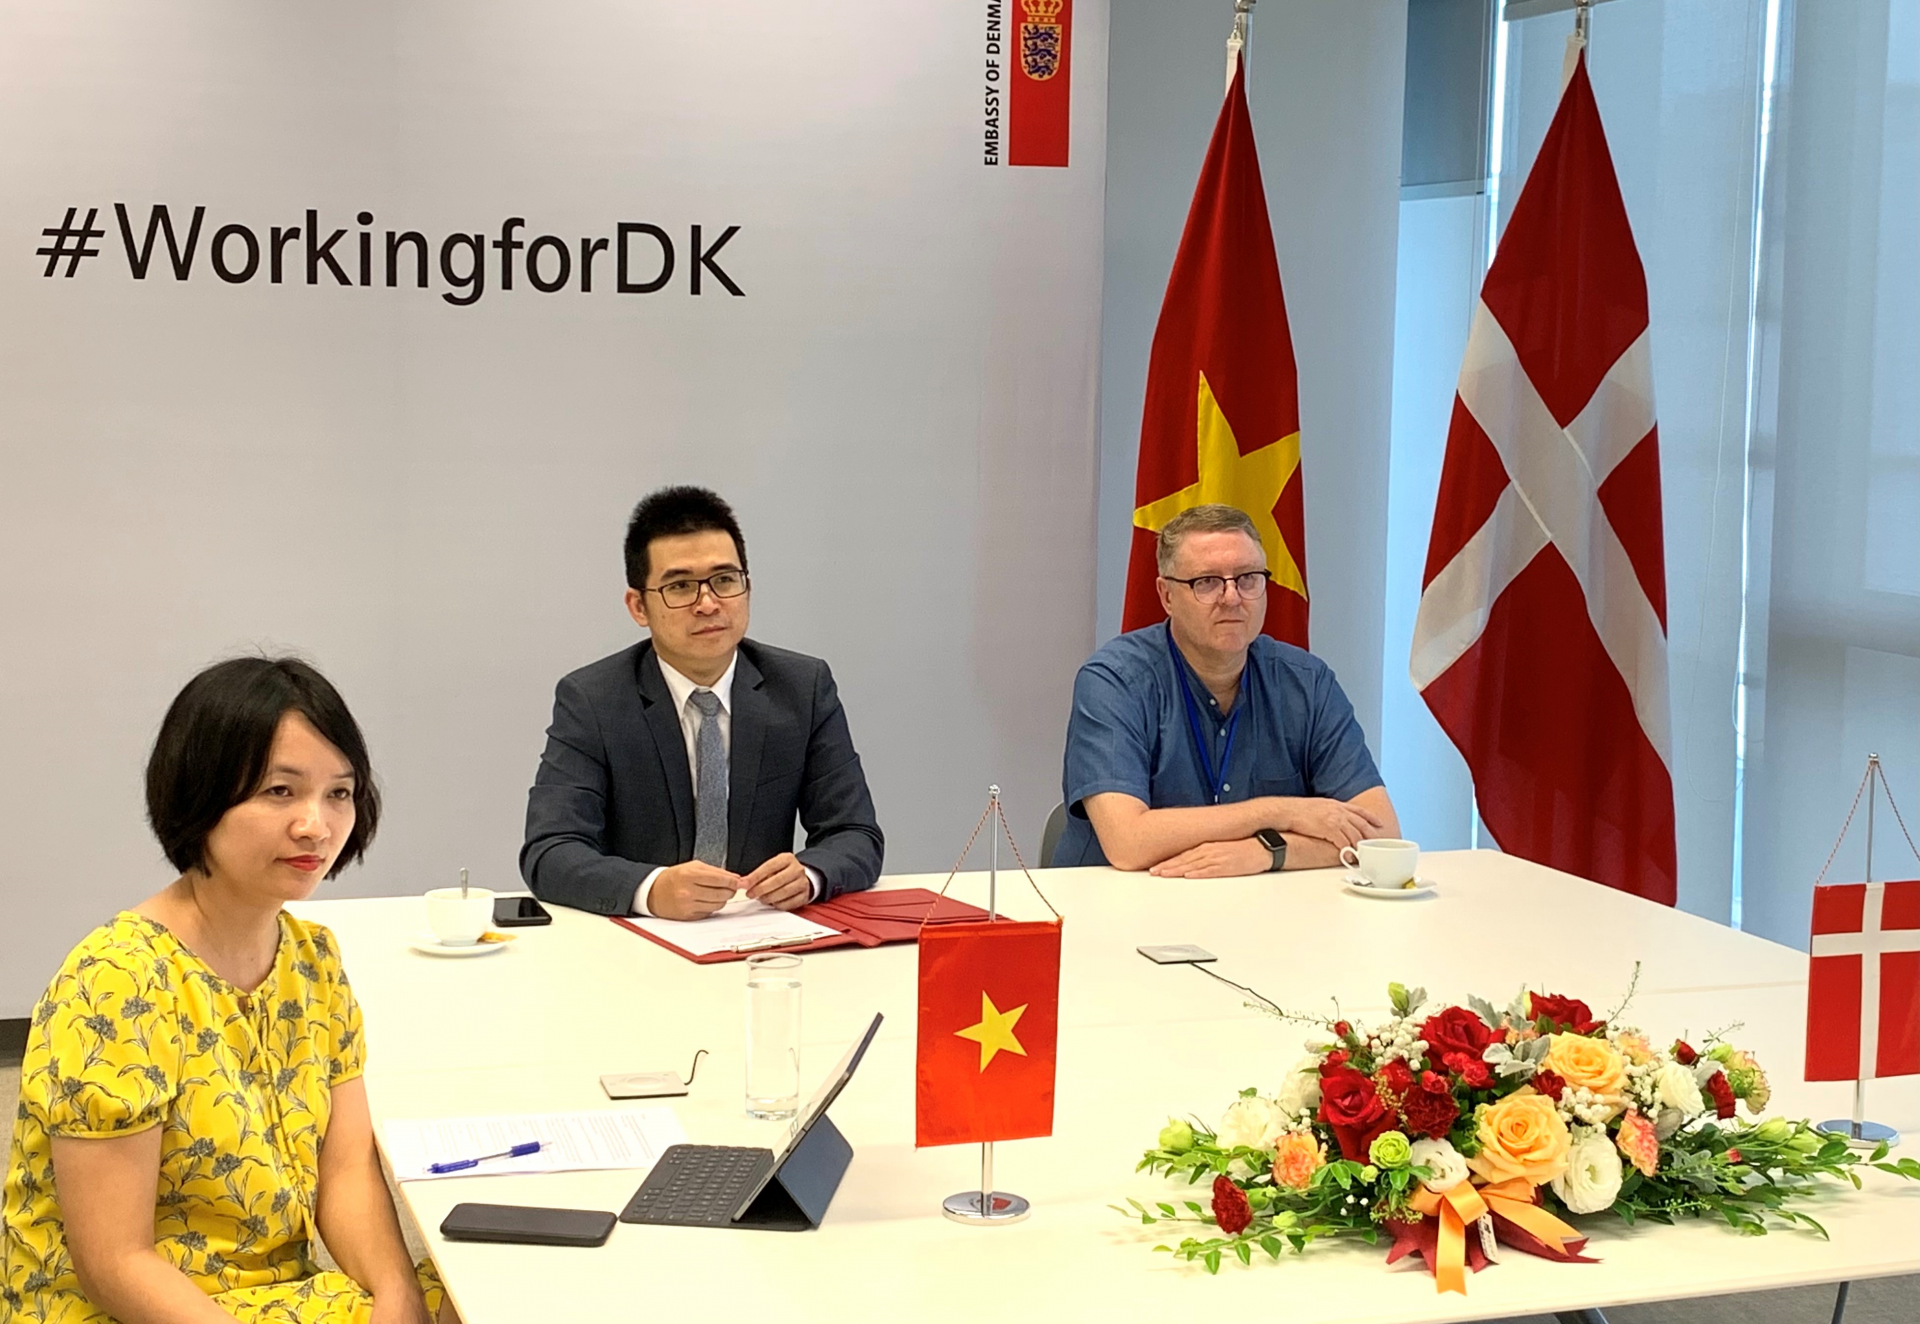 Vietnam-Denmark Offshore Wind Power Project Ready to Commence Its Geological Survey